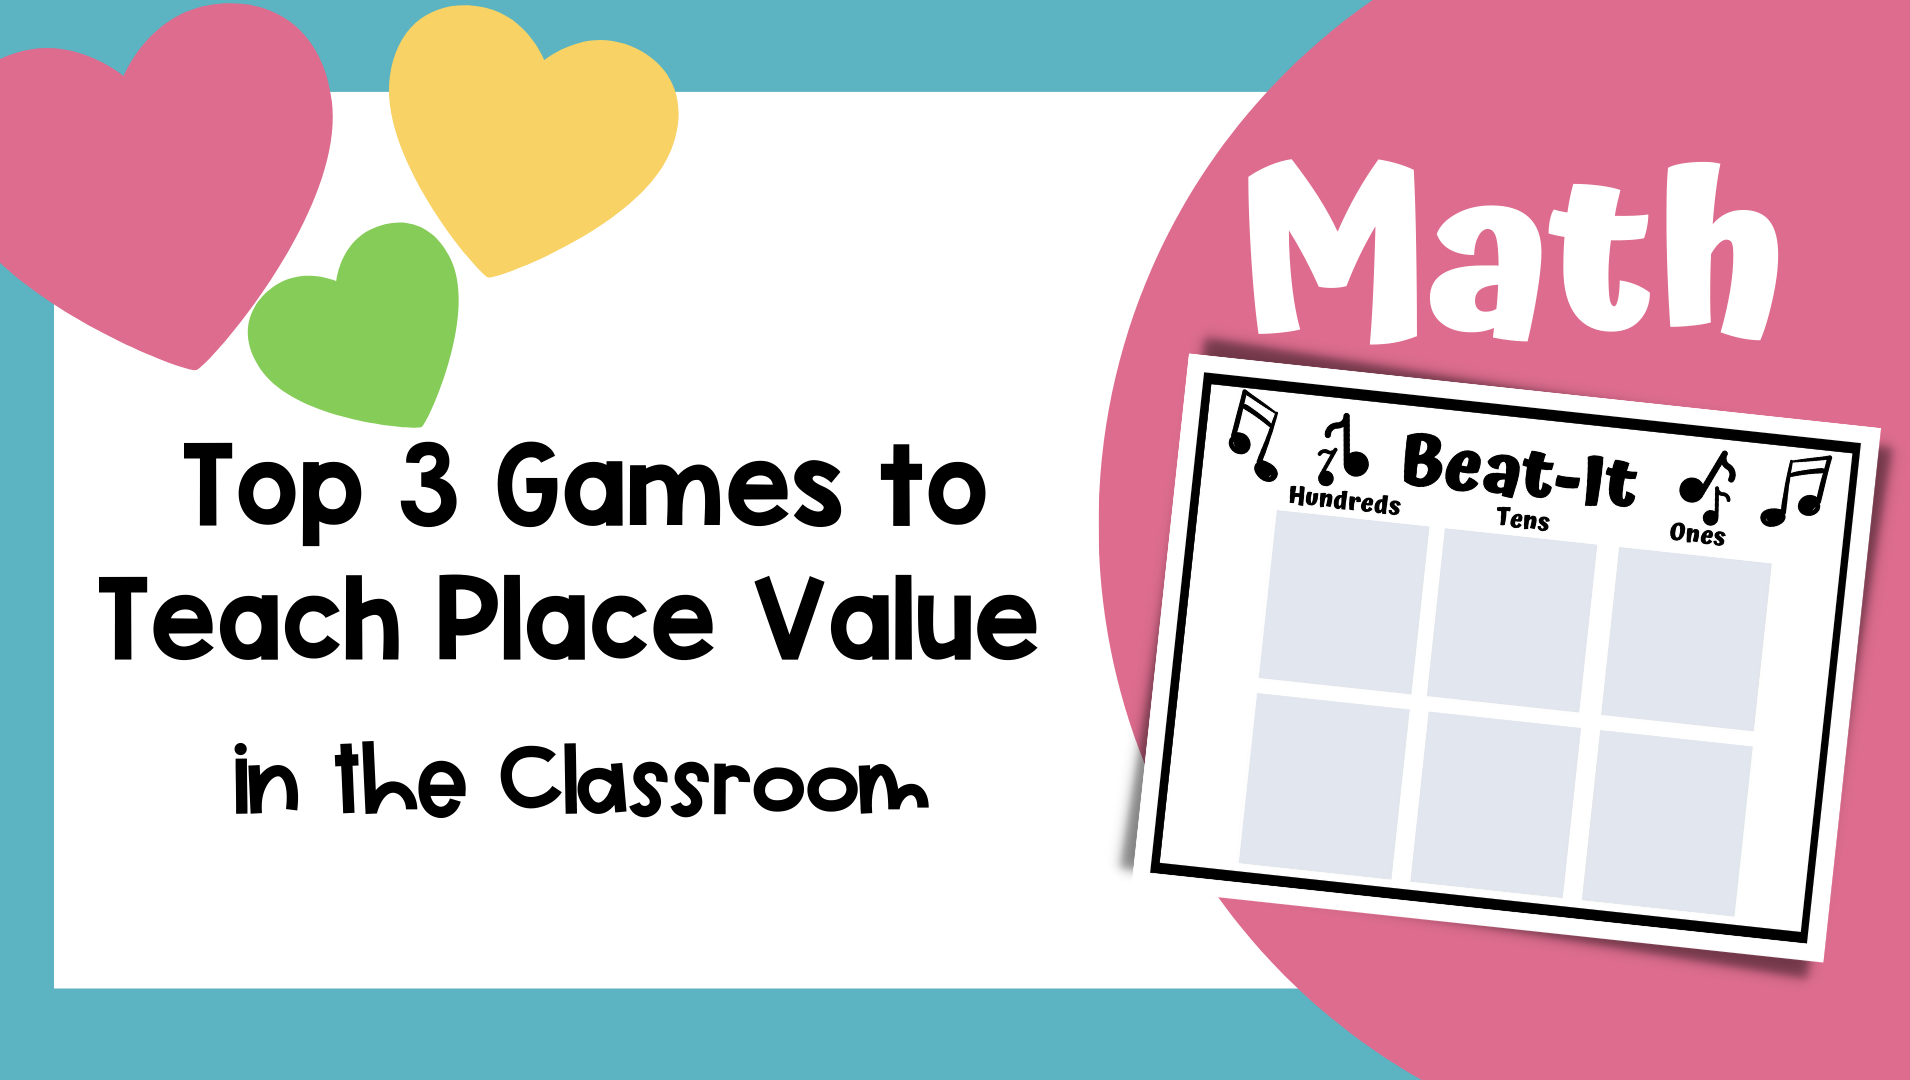 Learn About The Top 3 Idle Games for Teaching Math